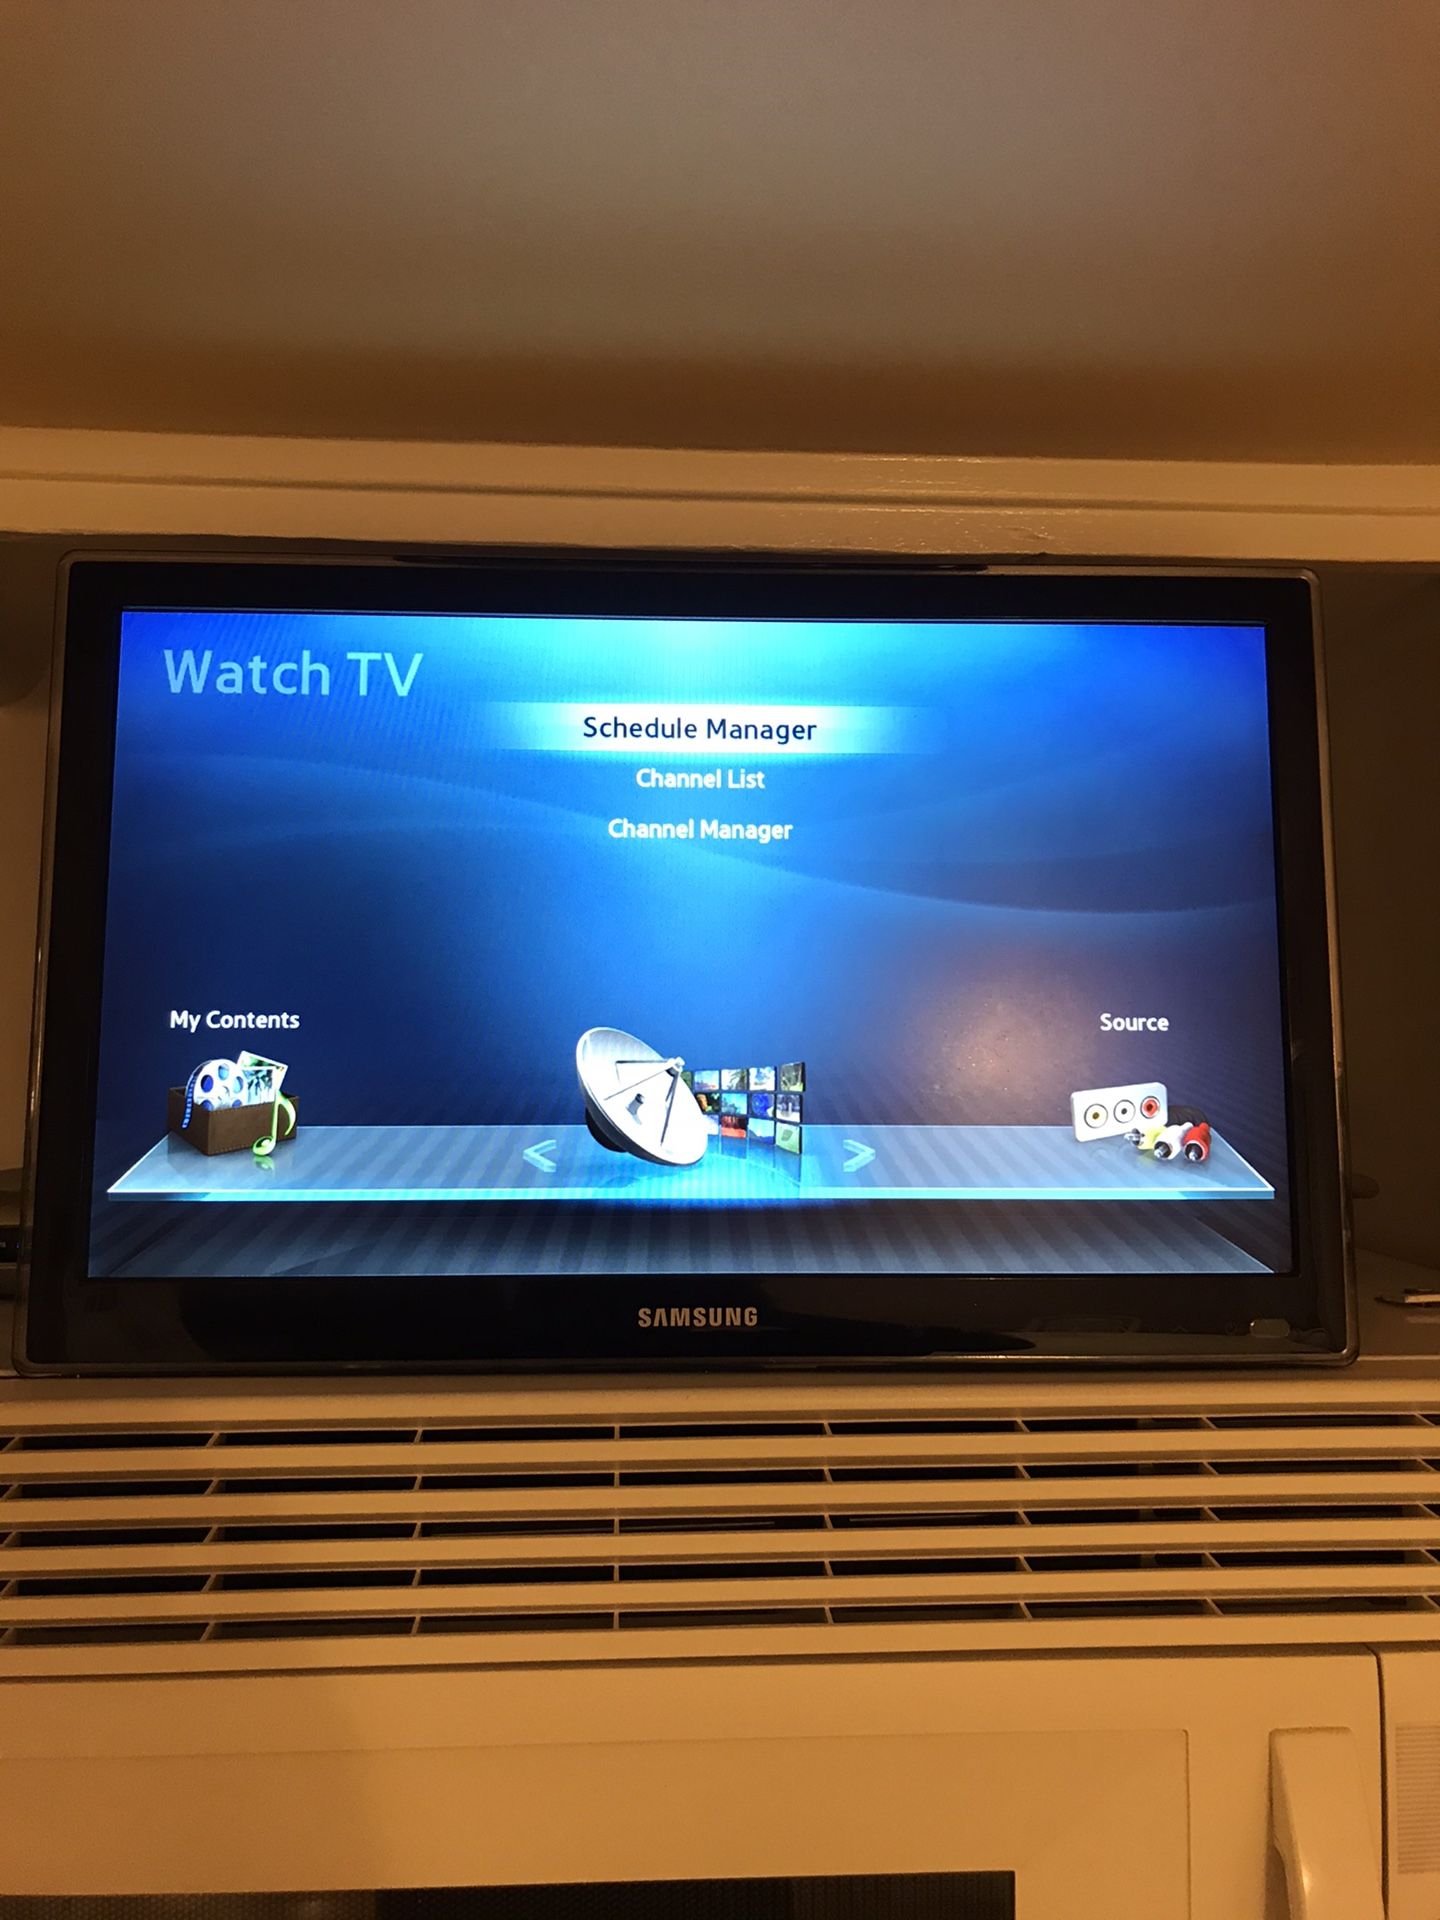 Samsung 19” Series 4 UN19F4000 LED TV with wall mount kit. Not a Smart TV